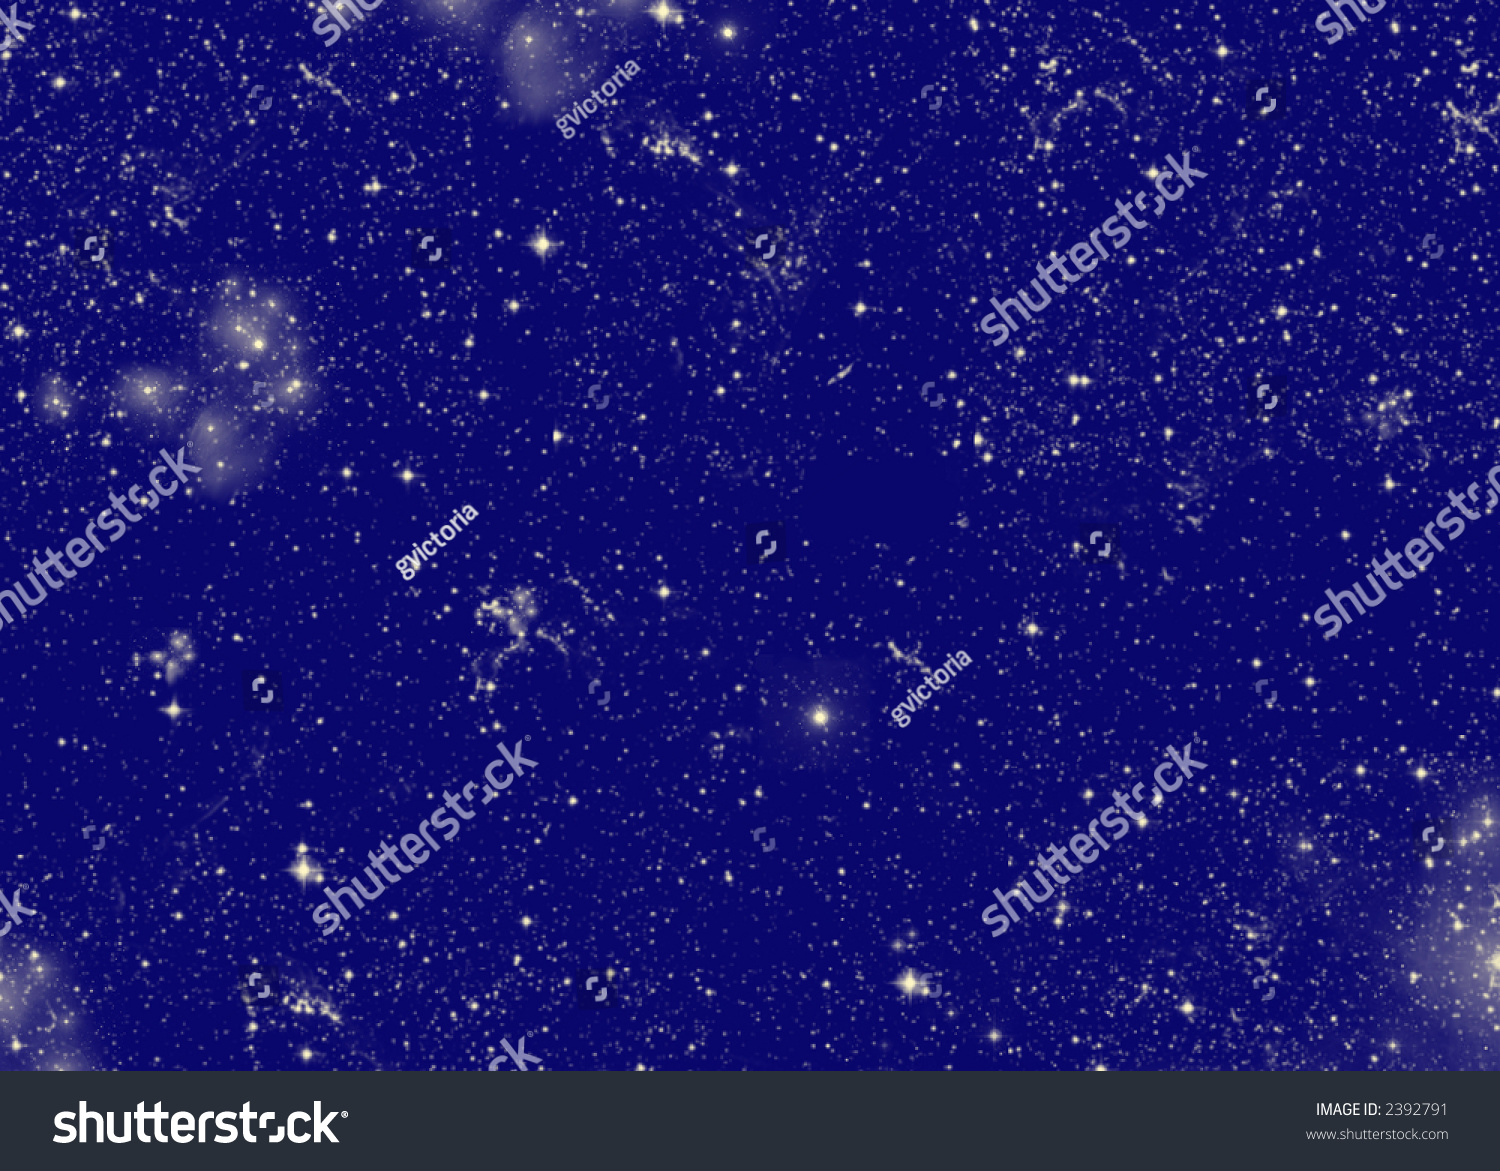 Midnight Blue Background With Stars And Constellations